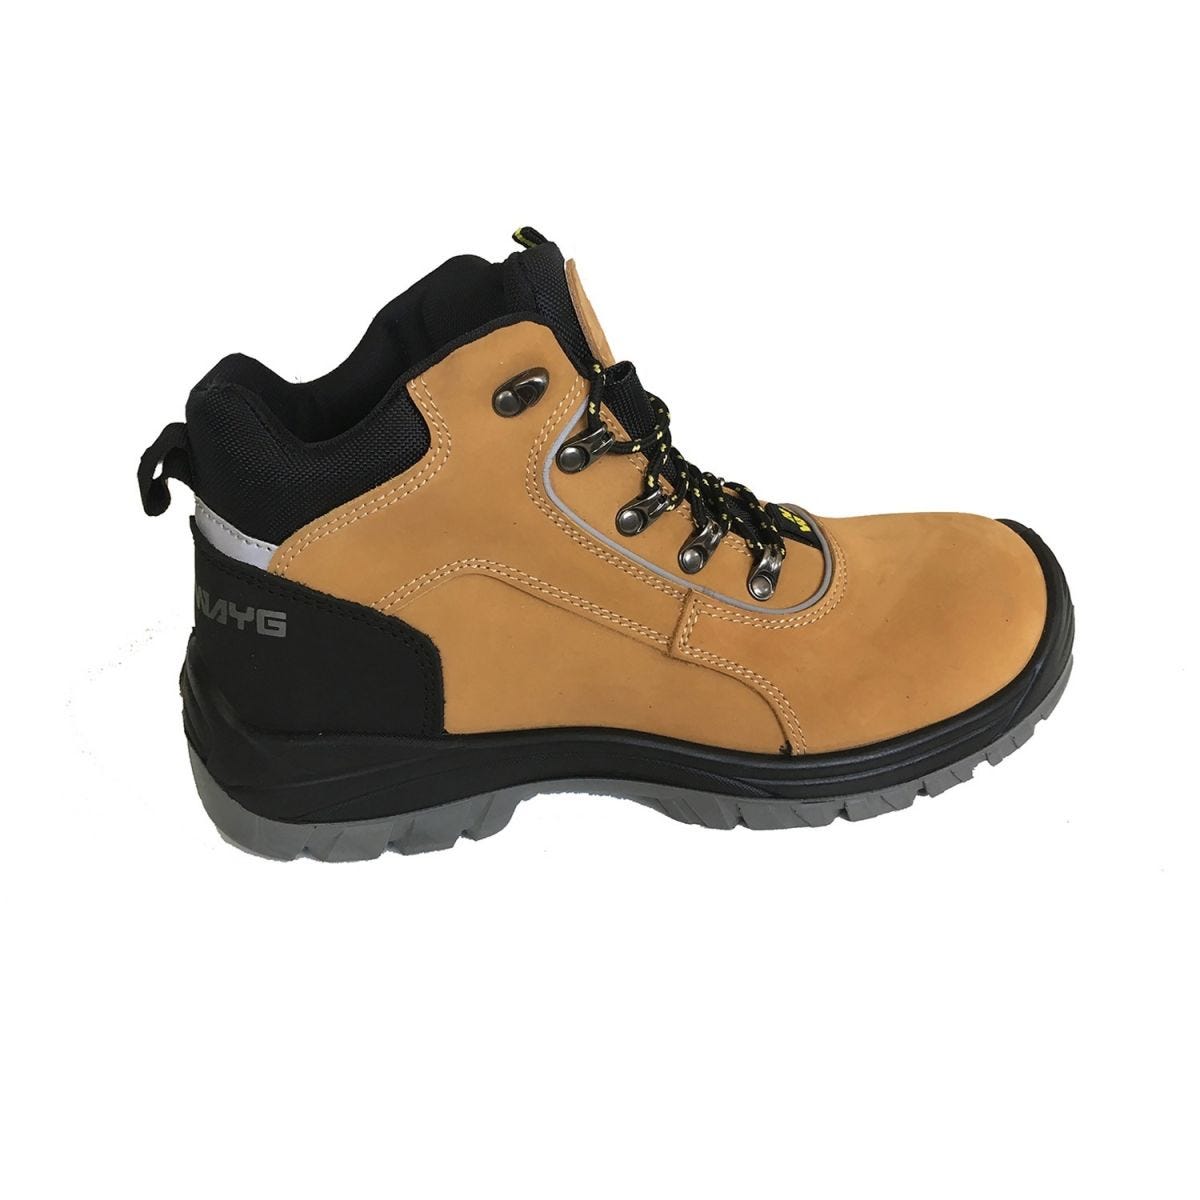 CHAUSSURES MONTANTES DE SECURITE RYAN CAMEL - NORTH WAYS - Taille 46 1